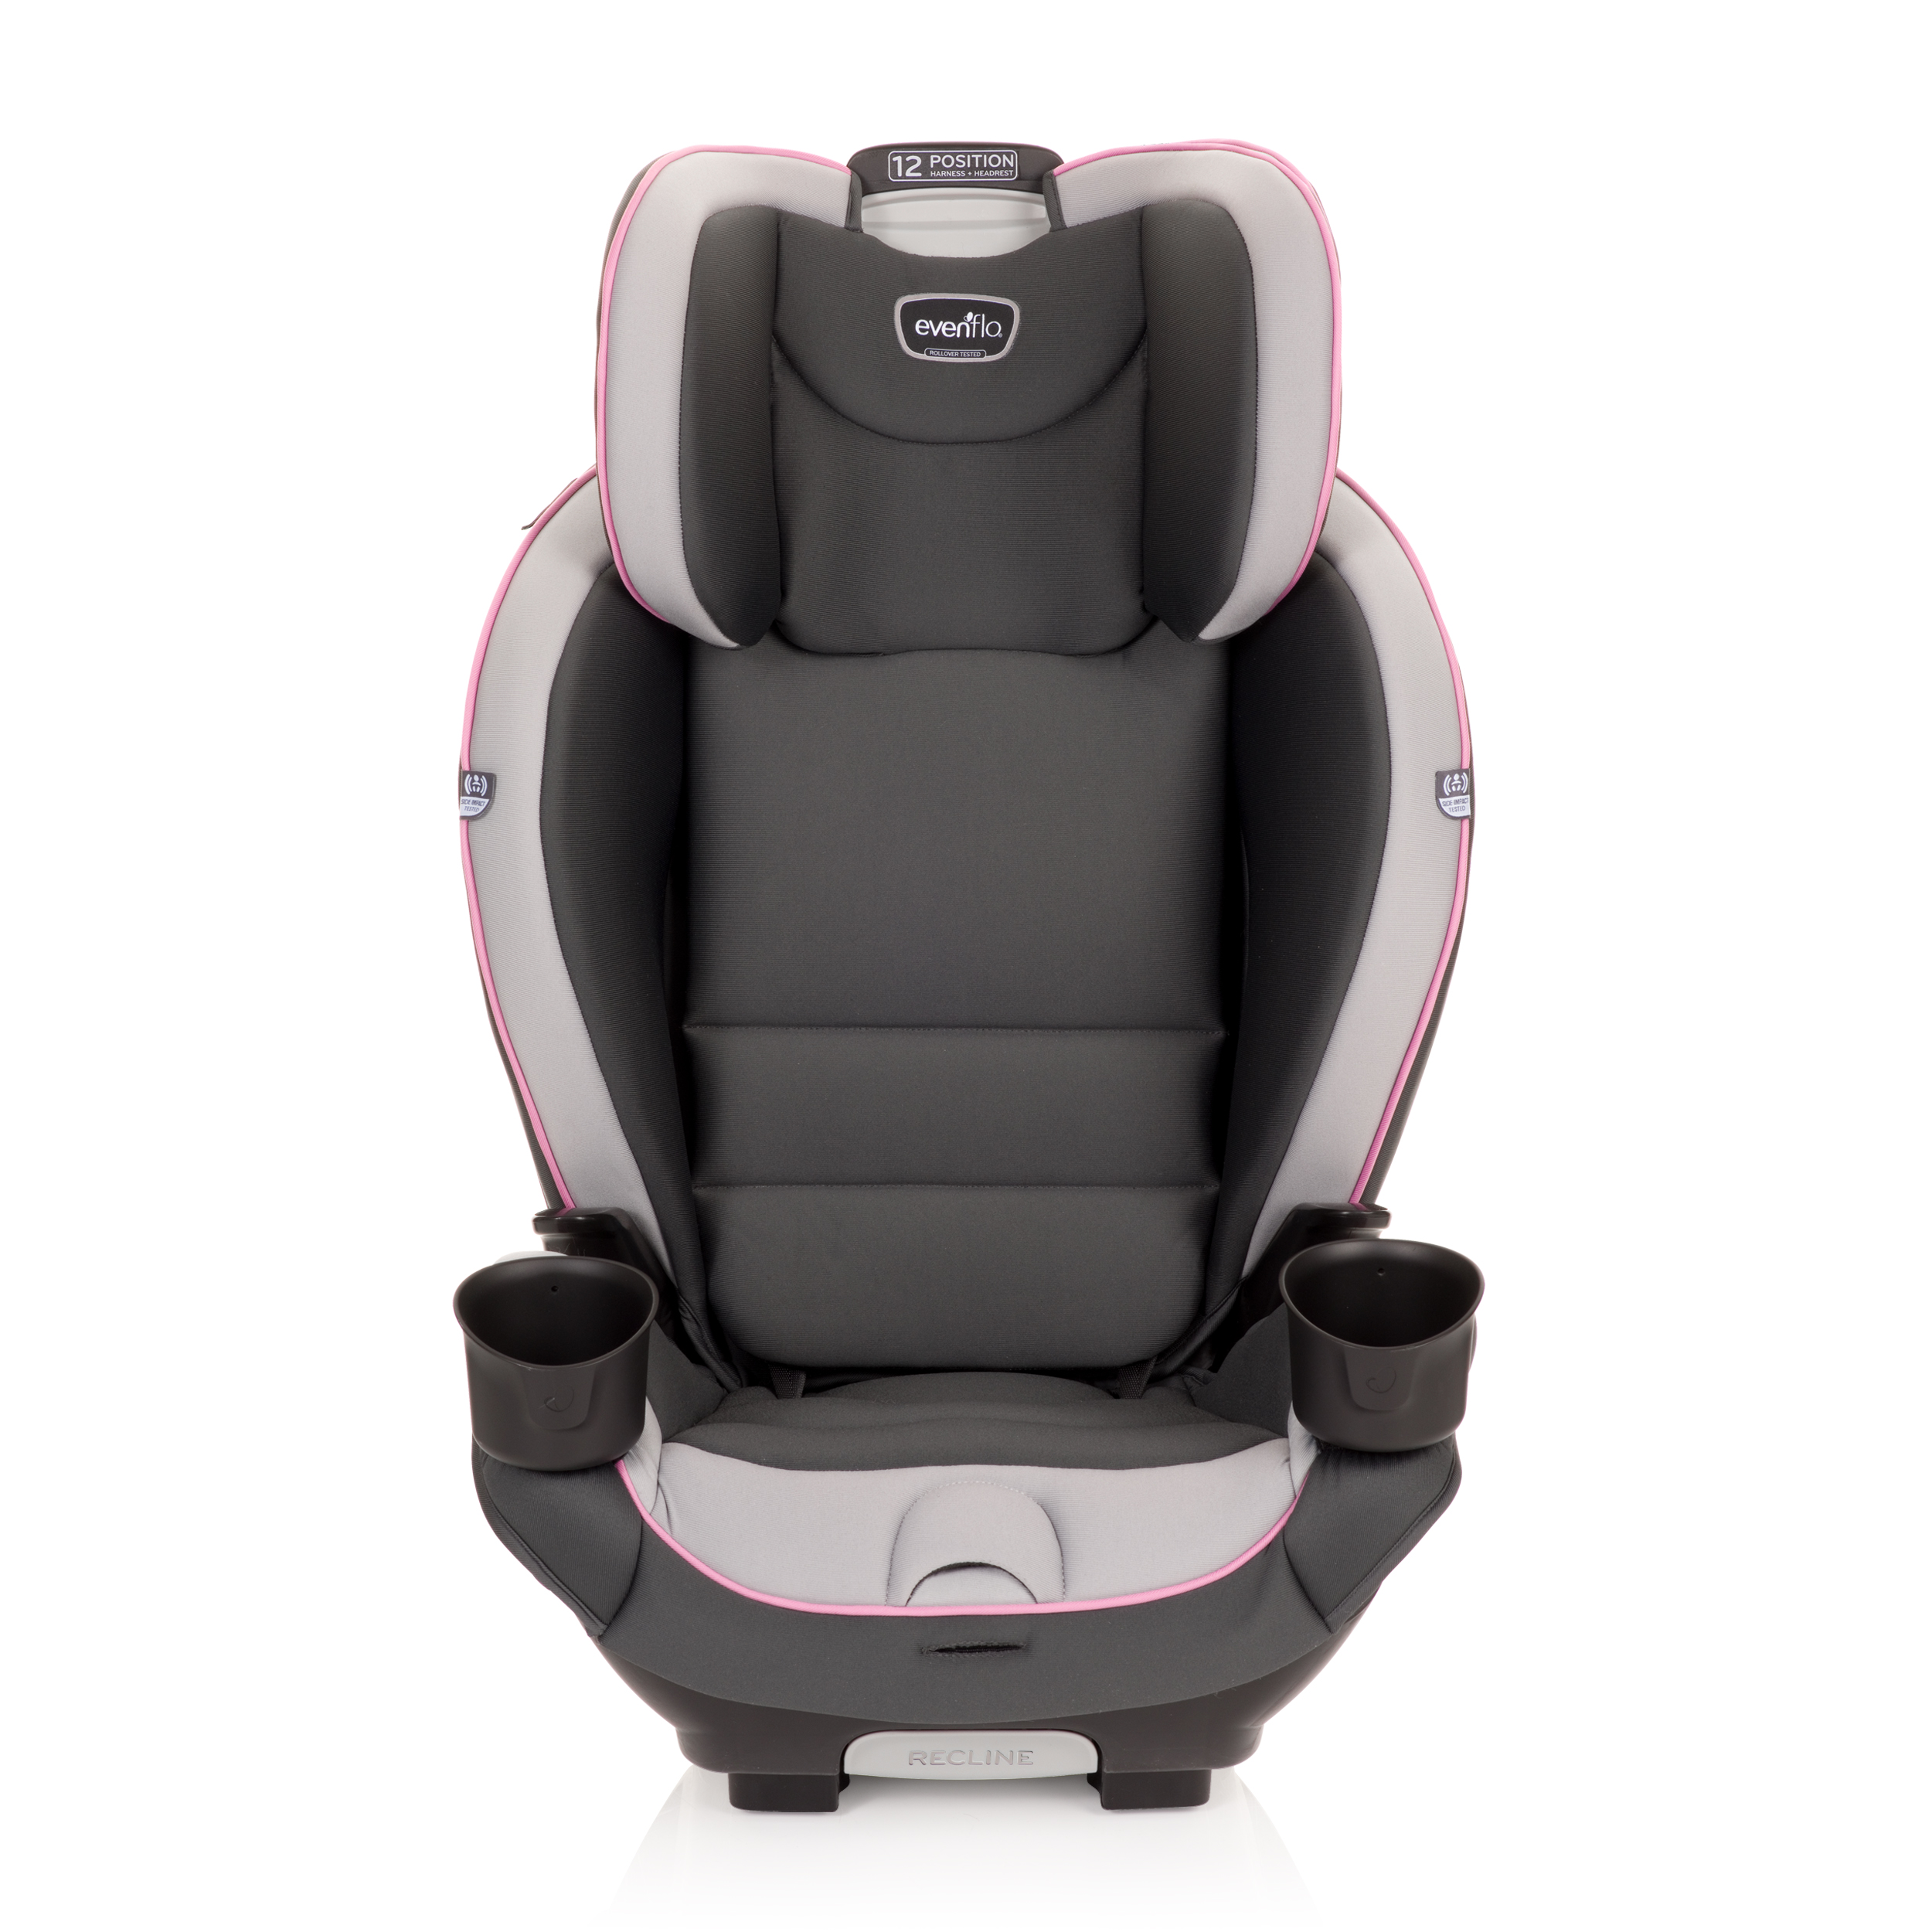 Evenflo EveryKid All-in-One High-back Booster Car Seat, Soft Pink - image 5 of 13